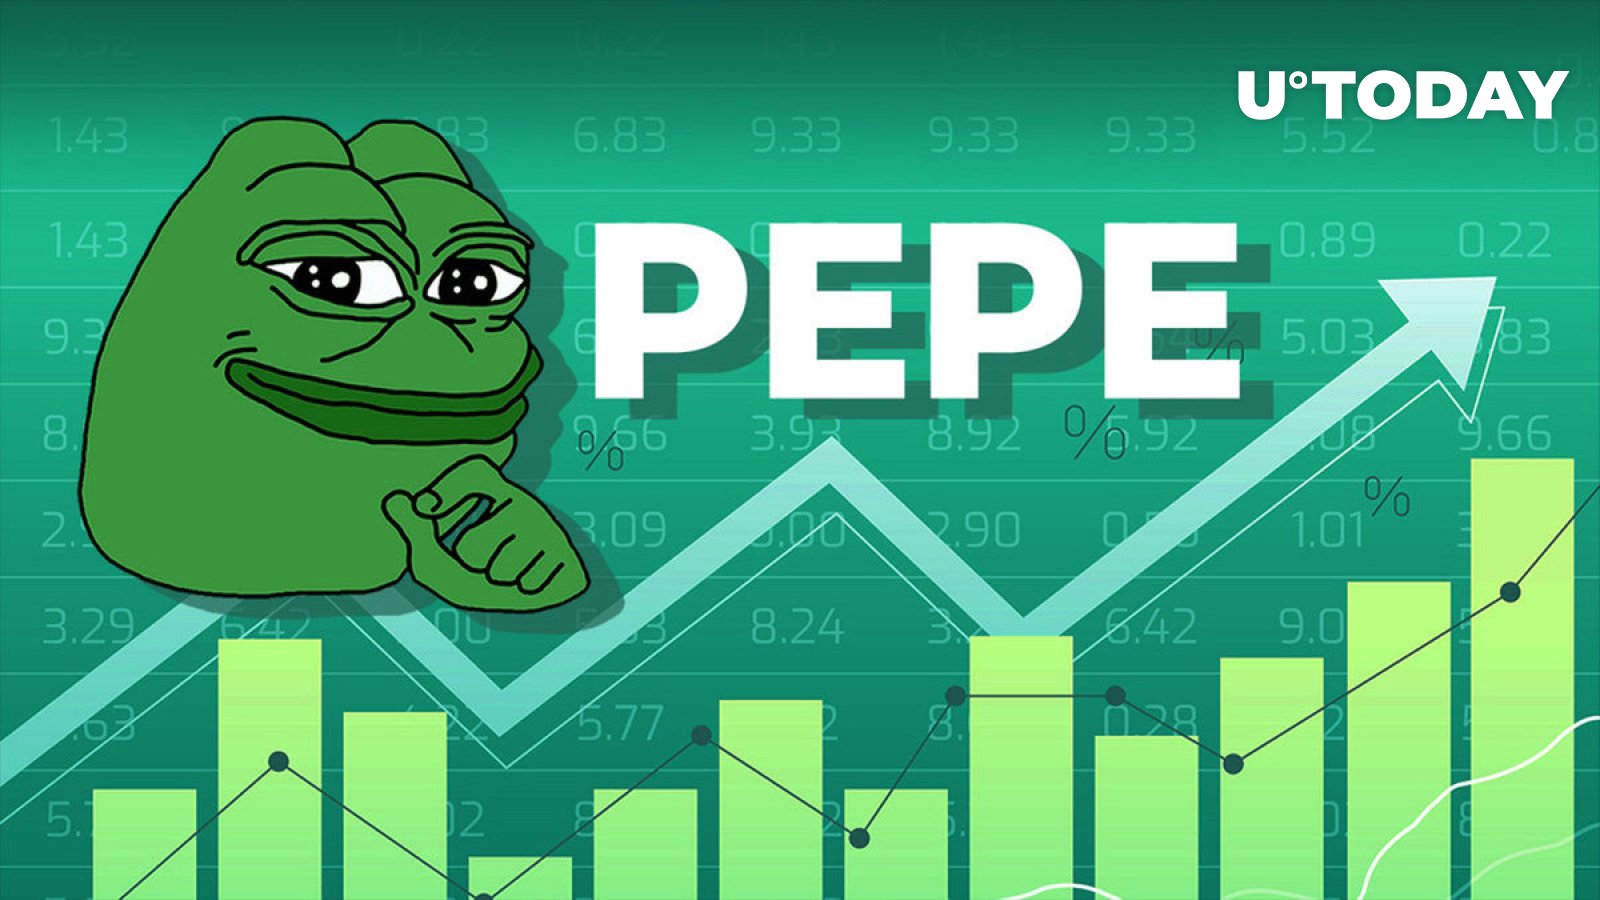 pepe-pepe-suddenly-jumps-7-as-whale-snaps-up-trillions-of-tokens